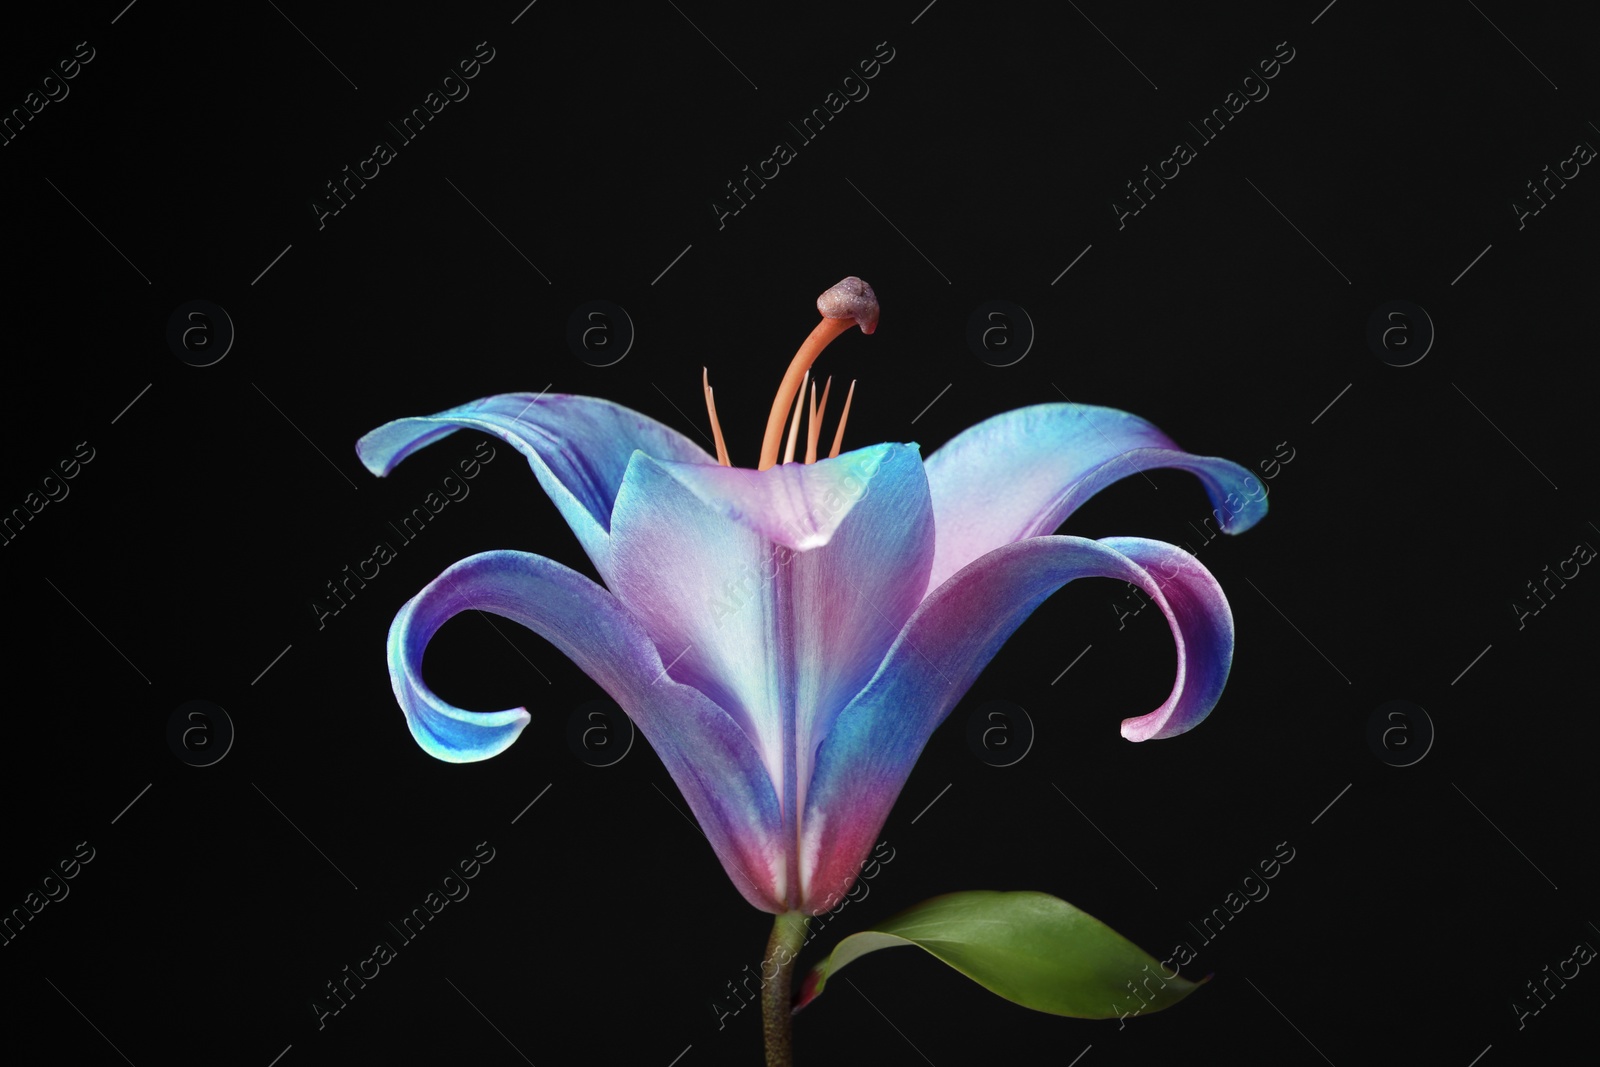 Image of Amazing lily flower in blue and pink colors on black background